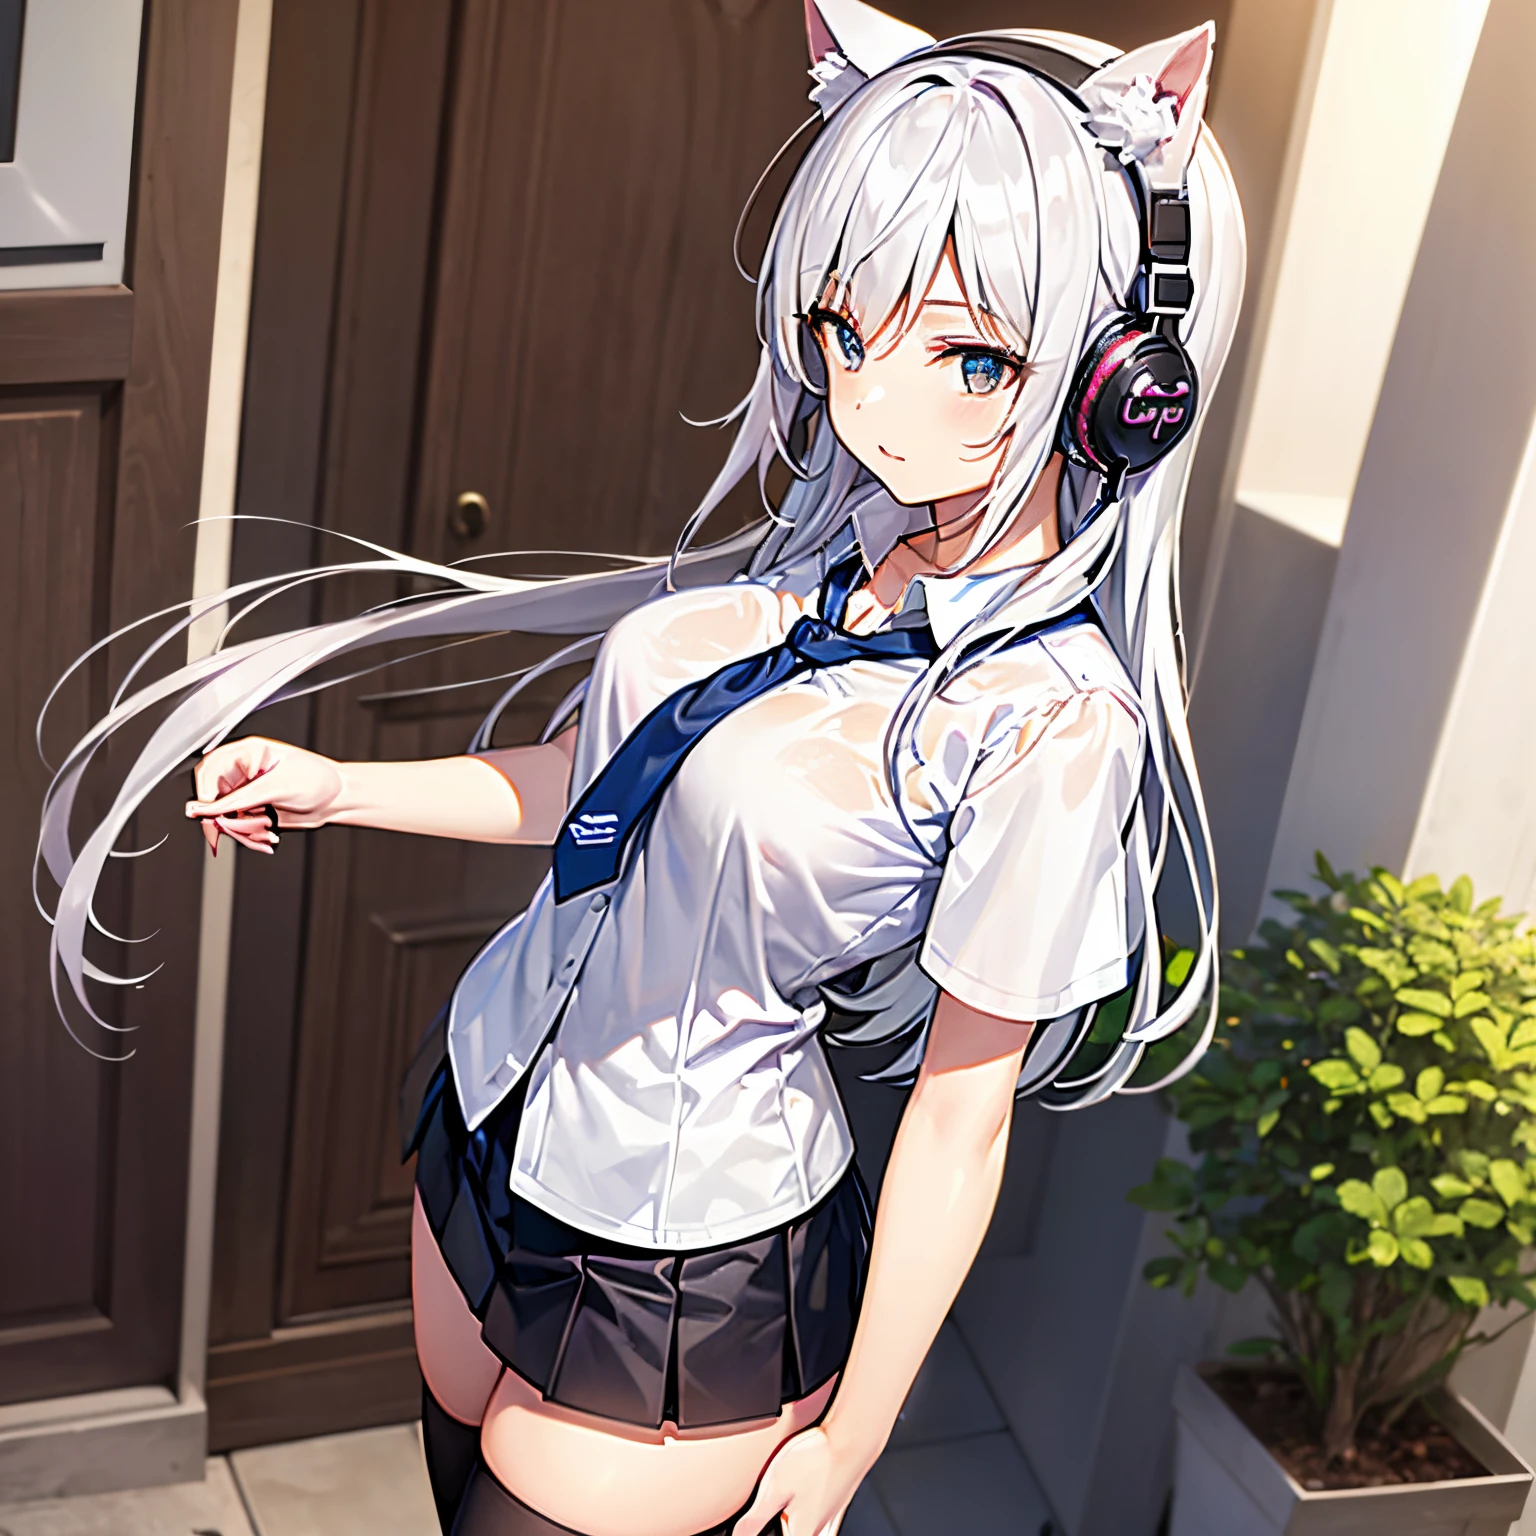 "anime girl, 1 person, silver white hair tied on both sides, light pink purple eyes, wearing cat ear headphones, female shirt, female , tie, black miniskirt, big breasts, smiling, tights,  standing cross-legged, side view,solo (full HD 4K+ image)"